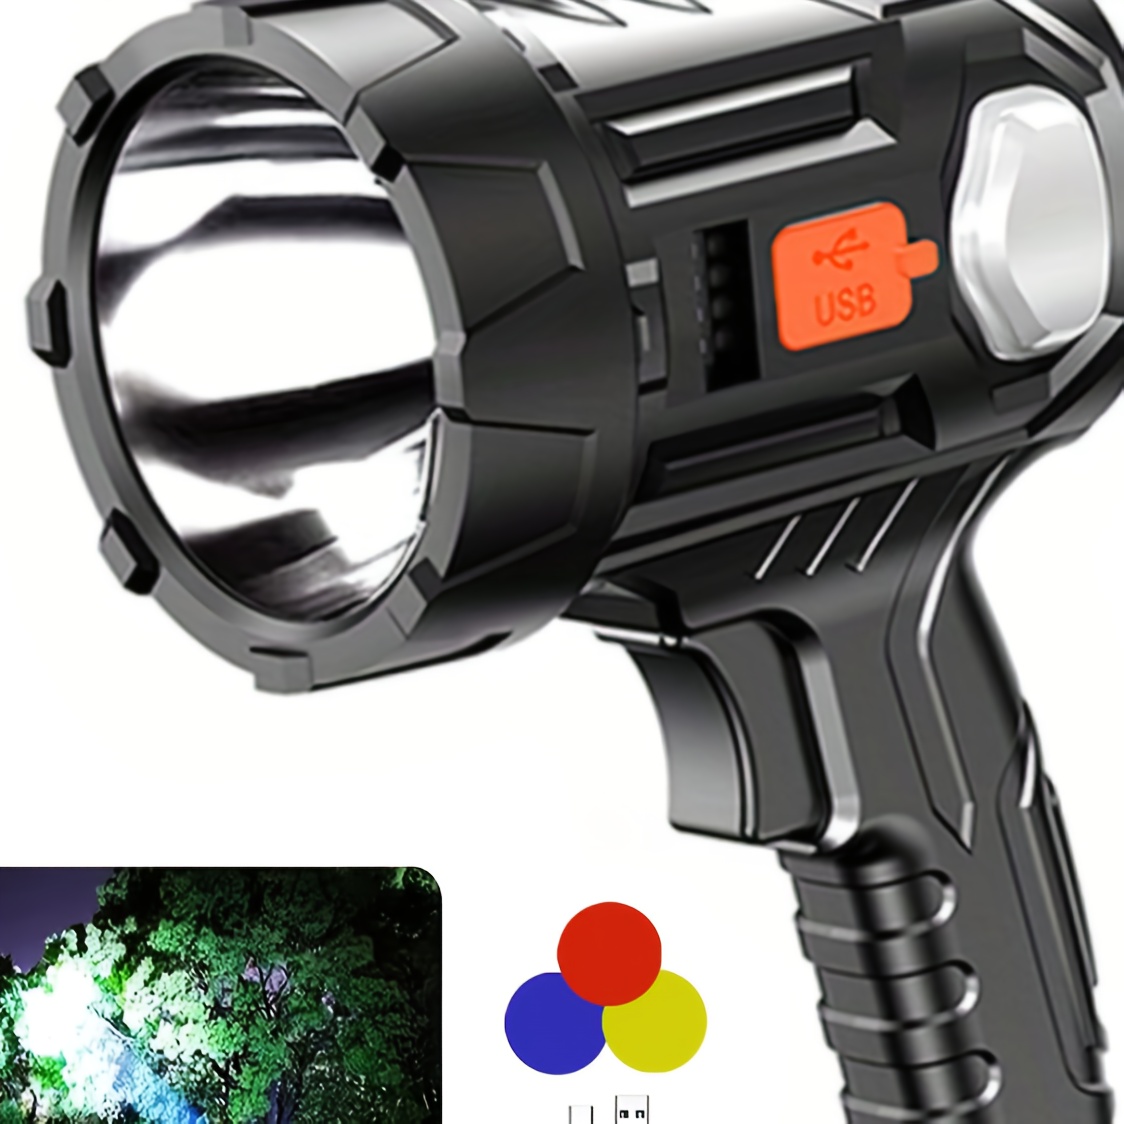 

1pc Rechargeable Spotlight Flashlight, Bright Searchlight With 6 Modes And 3 Colors Filter, Led Spot Lights Outdoor Handheld Torch Included Usb Cable, For Boating Hunting Camping, Home Lighting